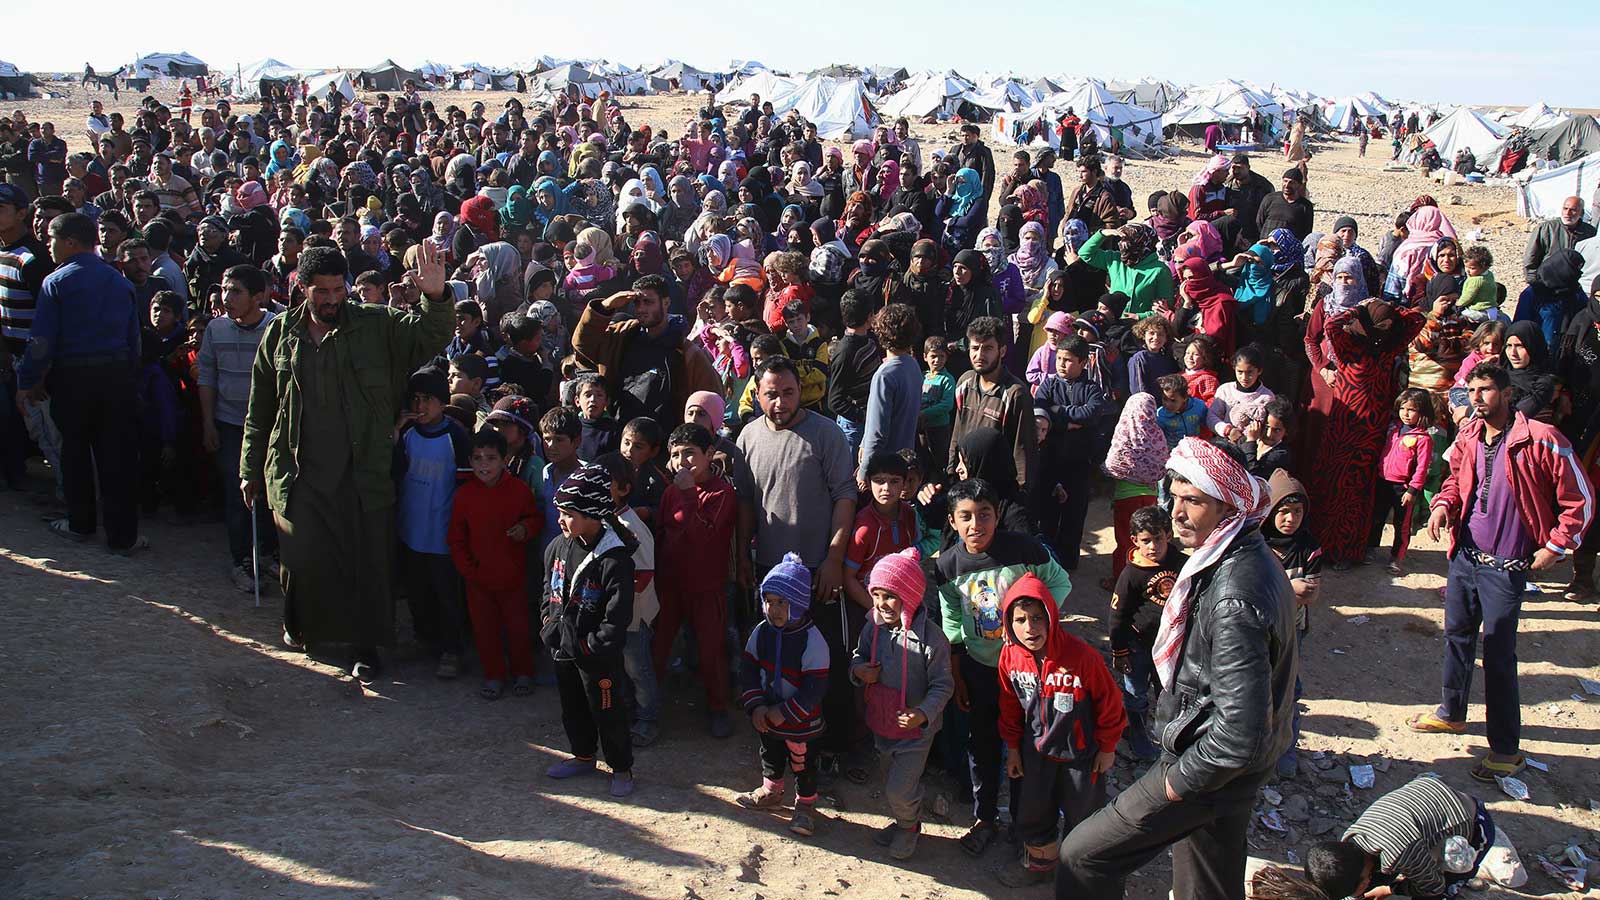 Few Syrian refugees were allowed into the U.S. In this photo, Syrian refugees wait to be approved to get into Jordan.